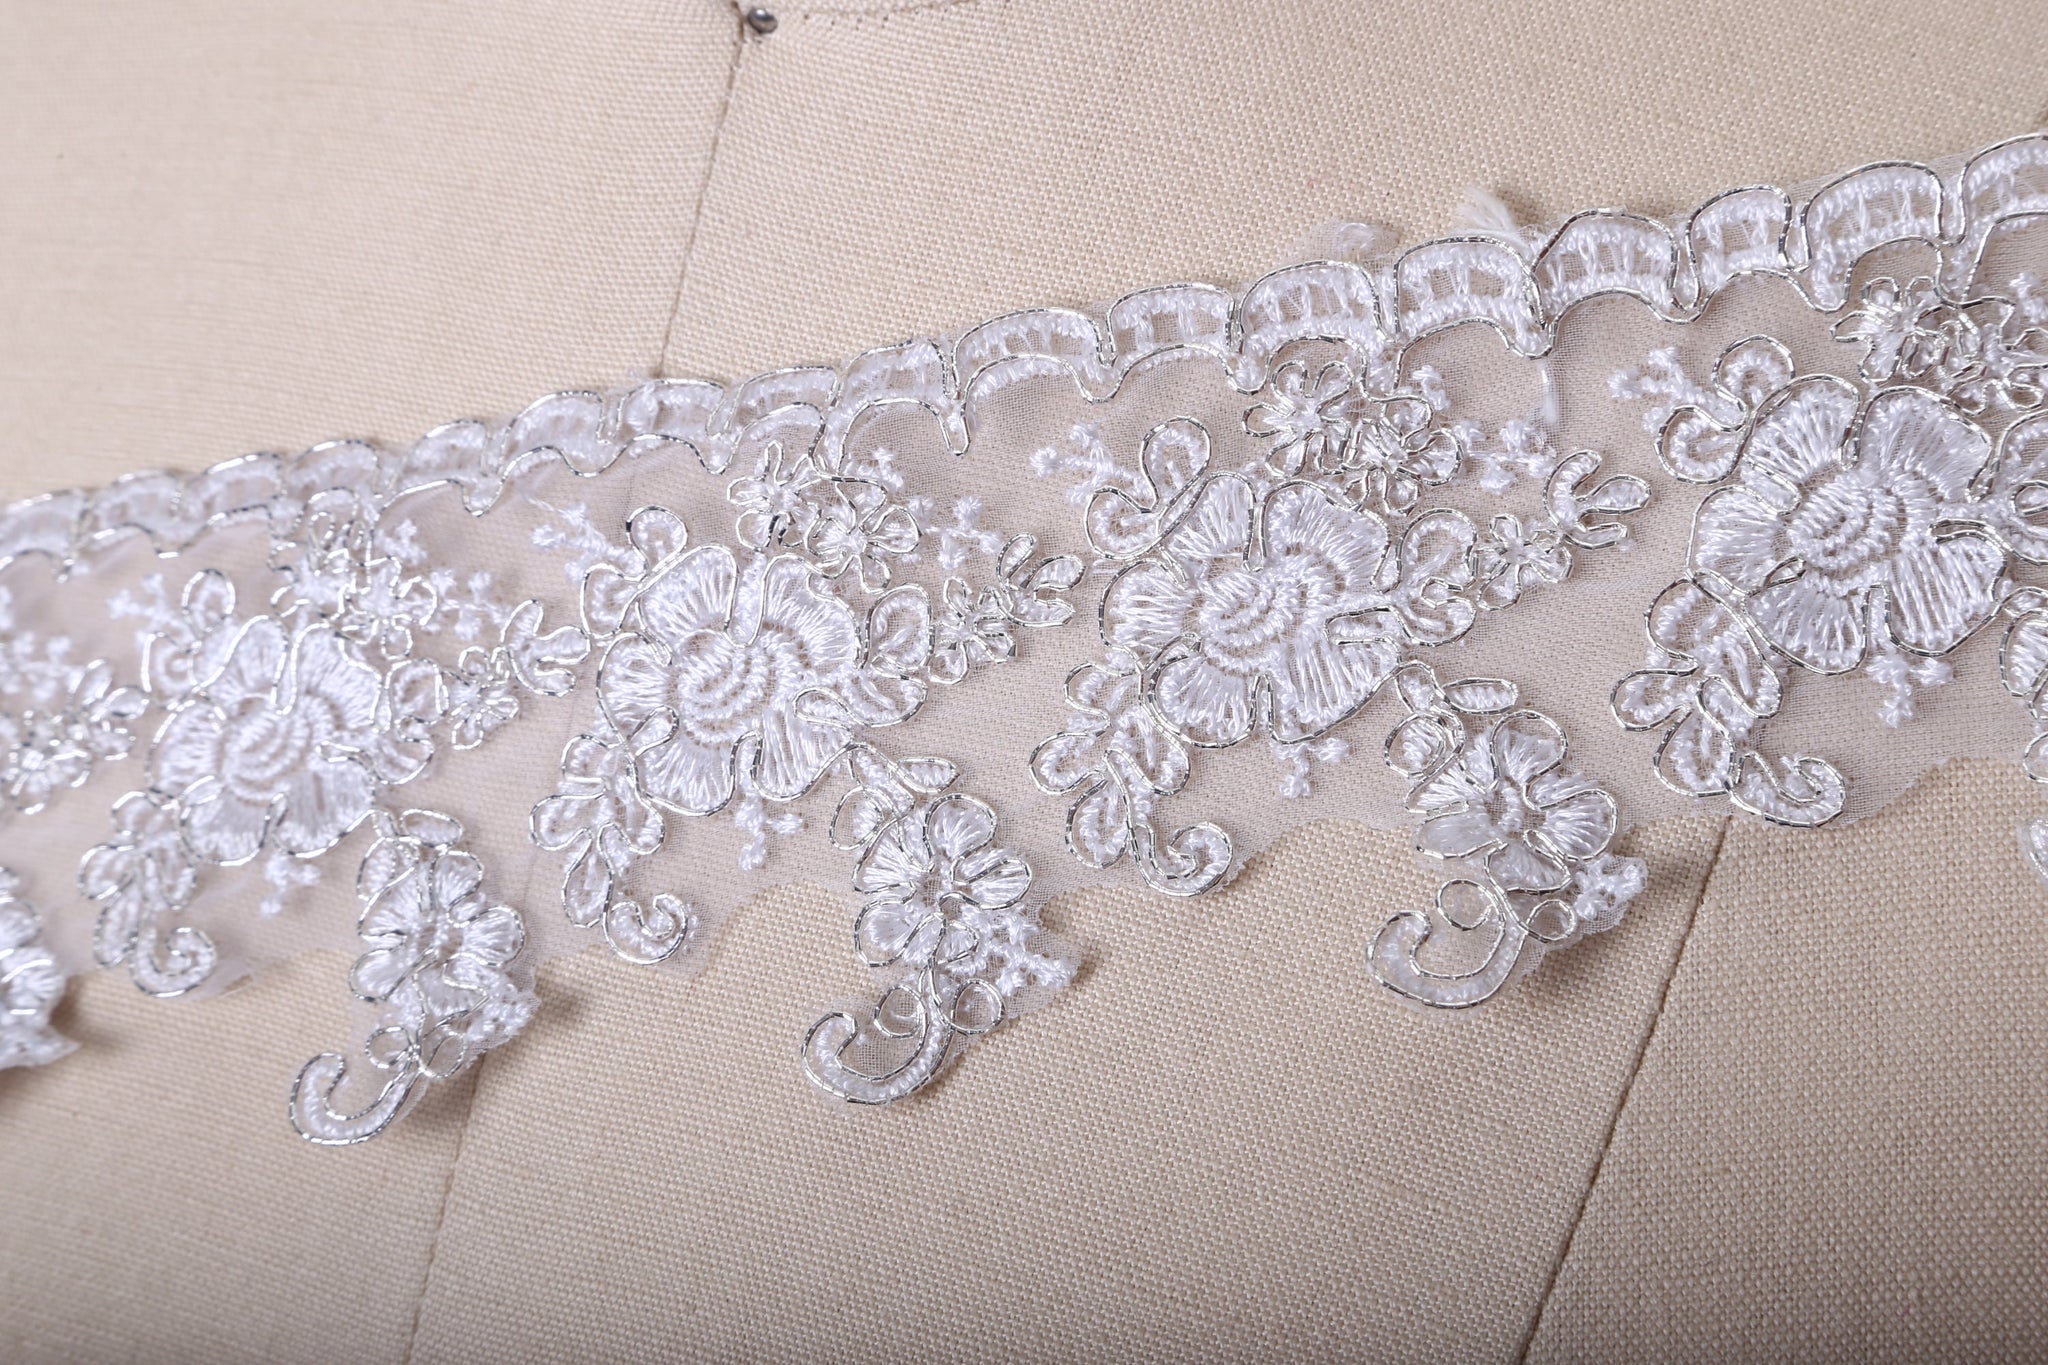 1 Yard Esteemed White and Silver Unbending Sheer Bridal Lace